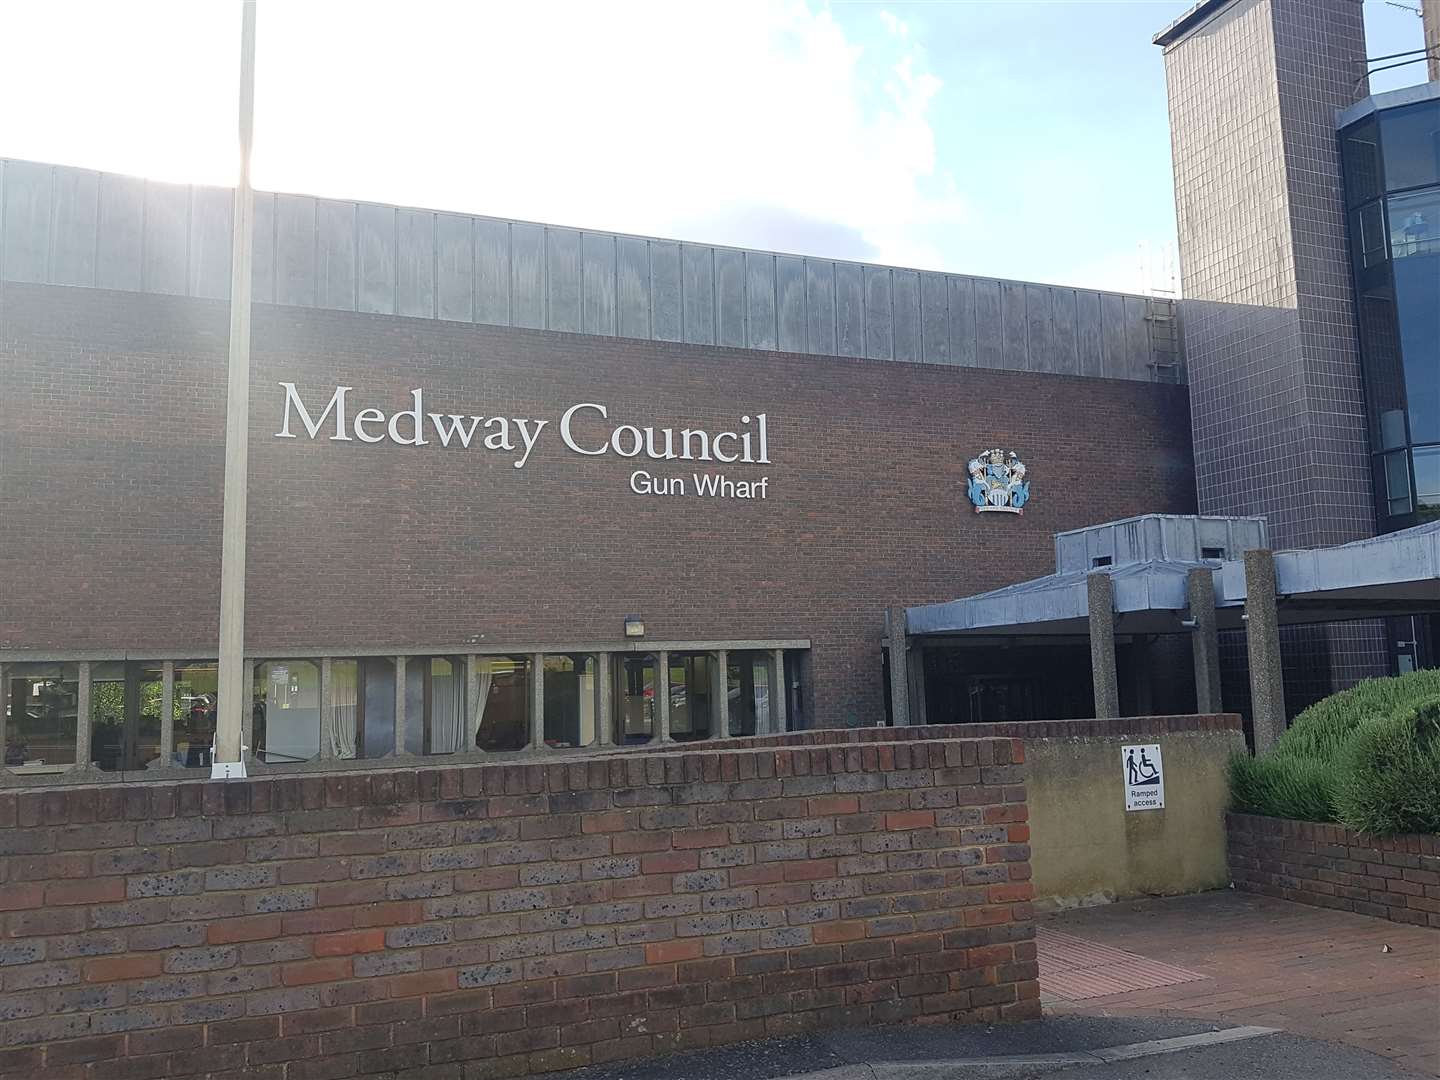 Medway Council gave out a total of 50 ASBOs between November 2018 and October 2019